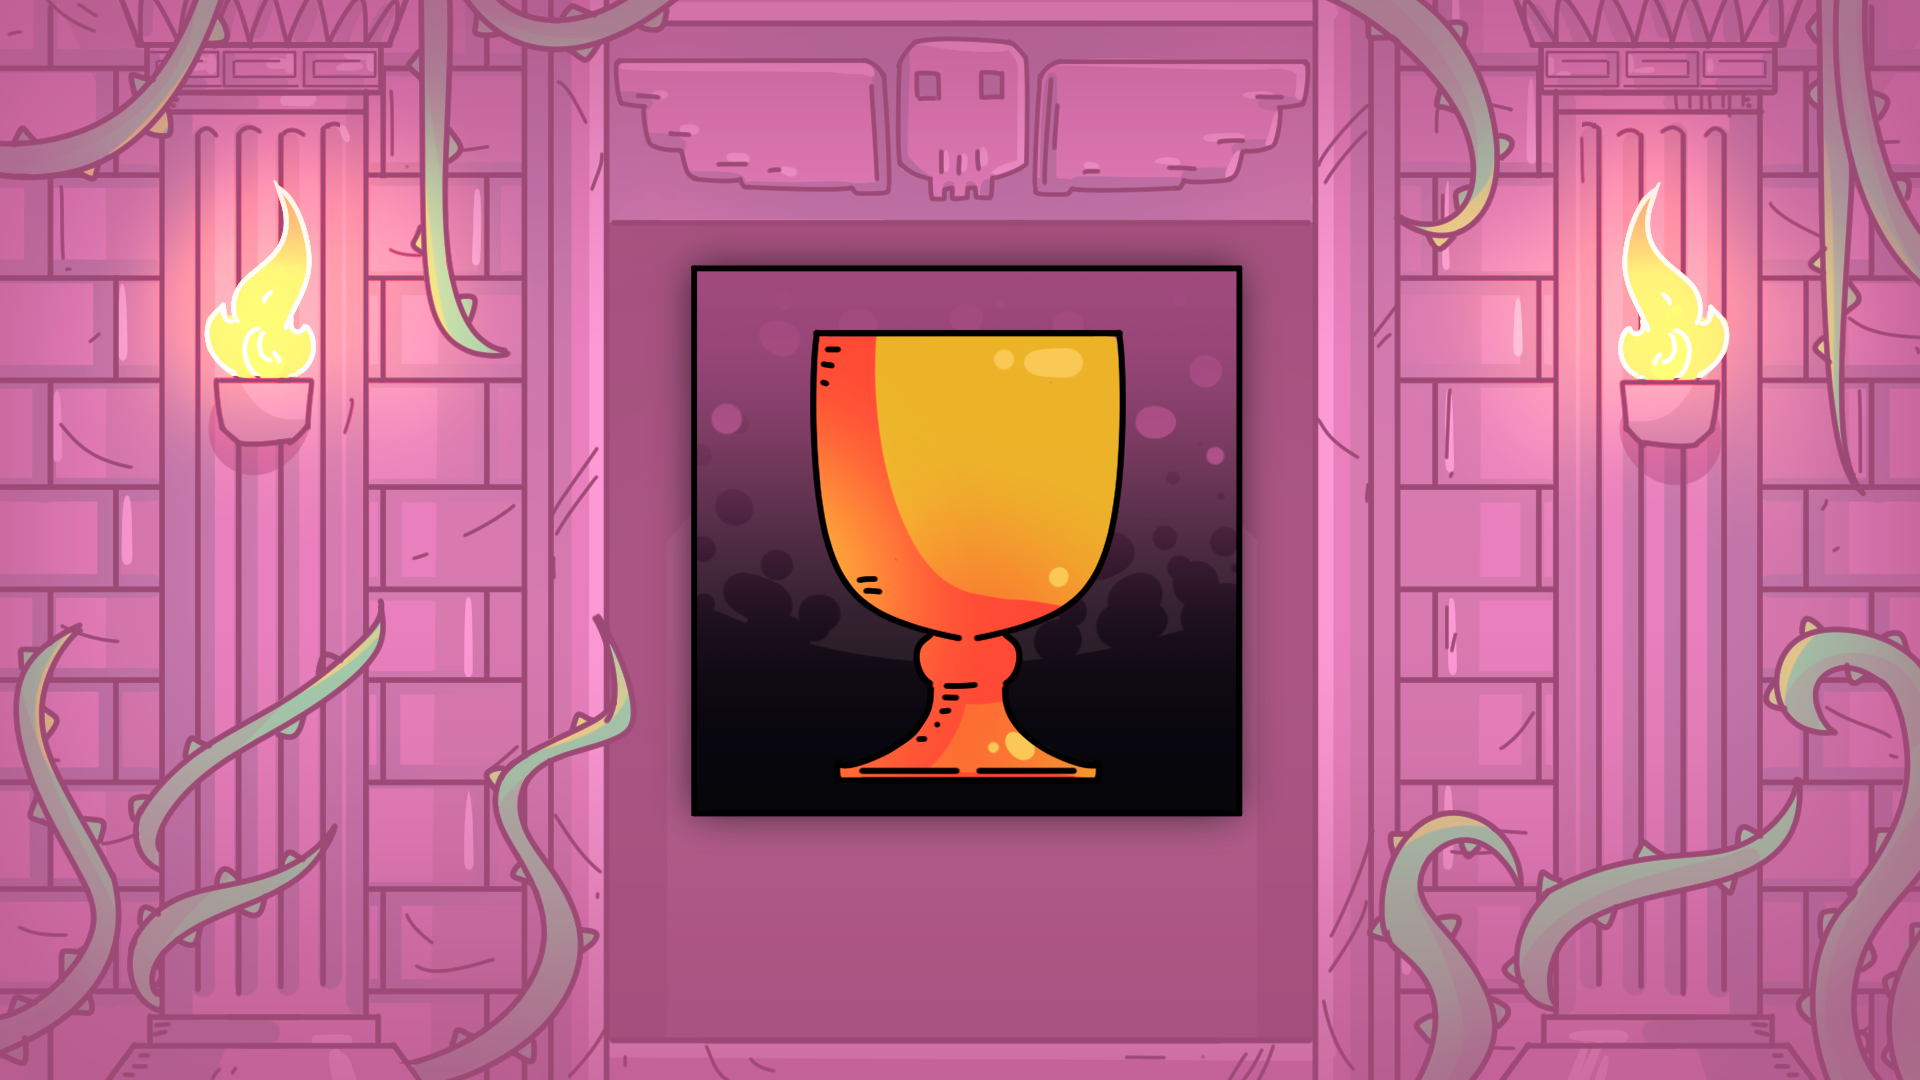 Icon for To seek the Holy Grail!